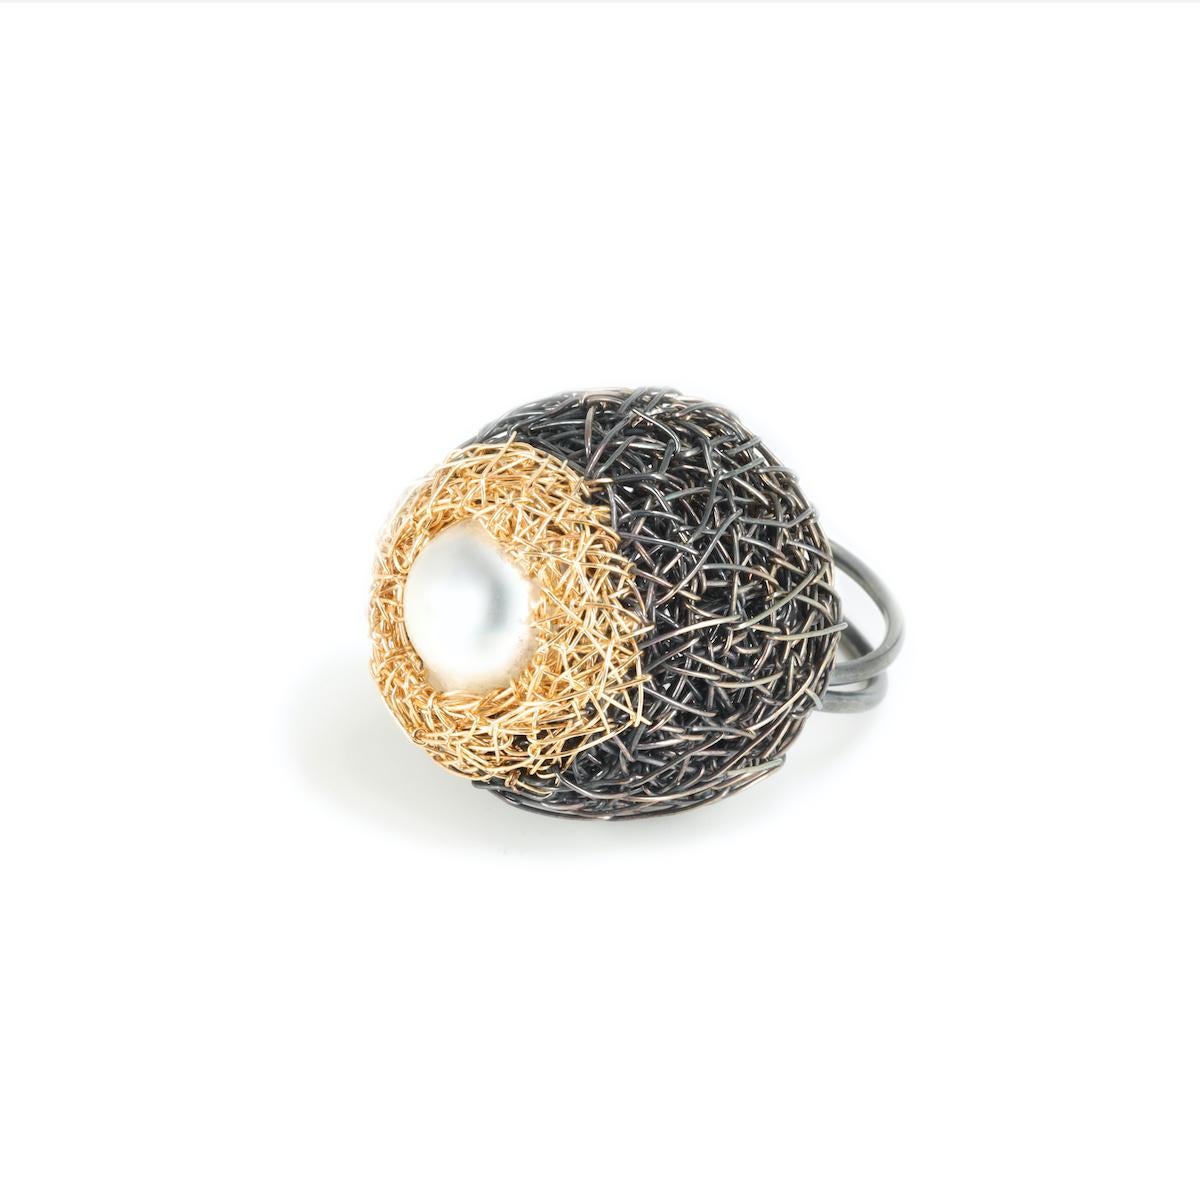 Bead One Off Pearl Ring 14 K Yellow Gold F. Blackened silver by the artist